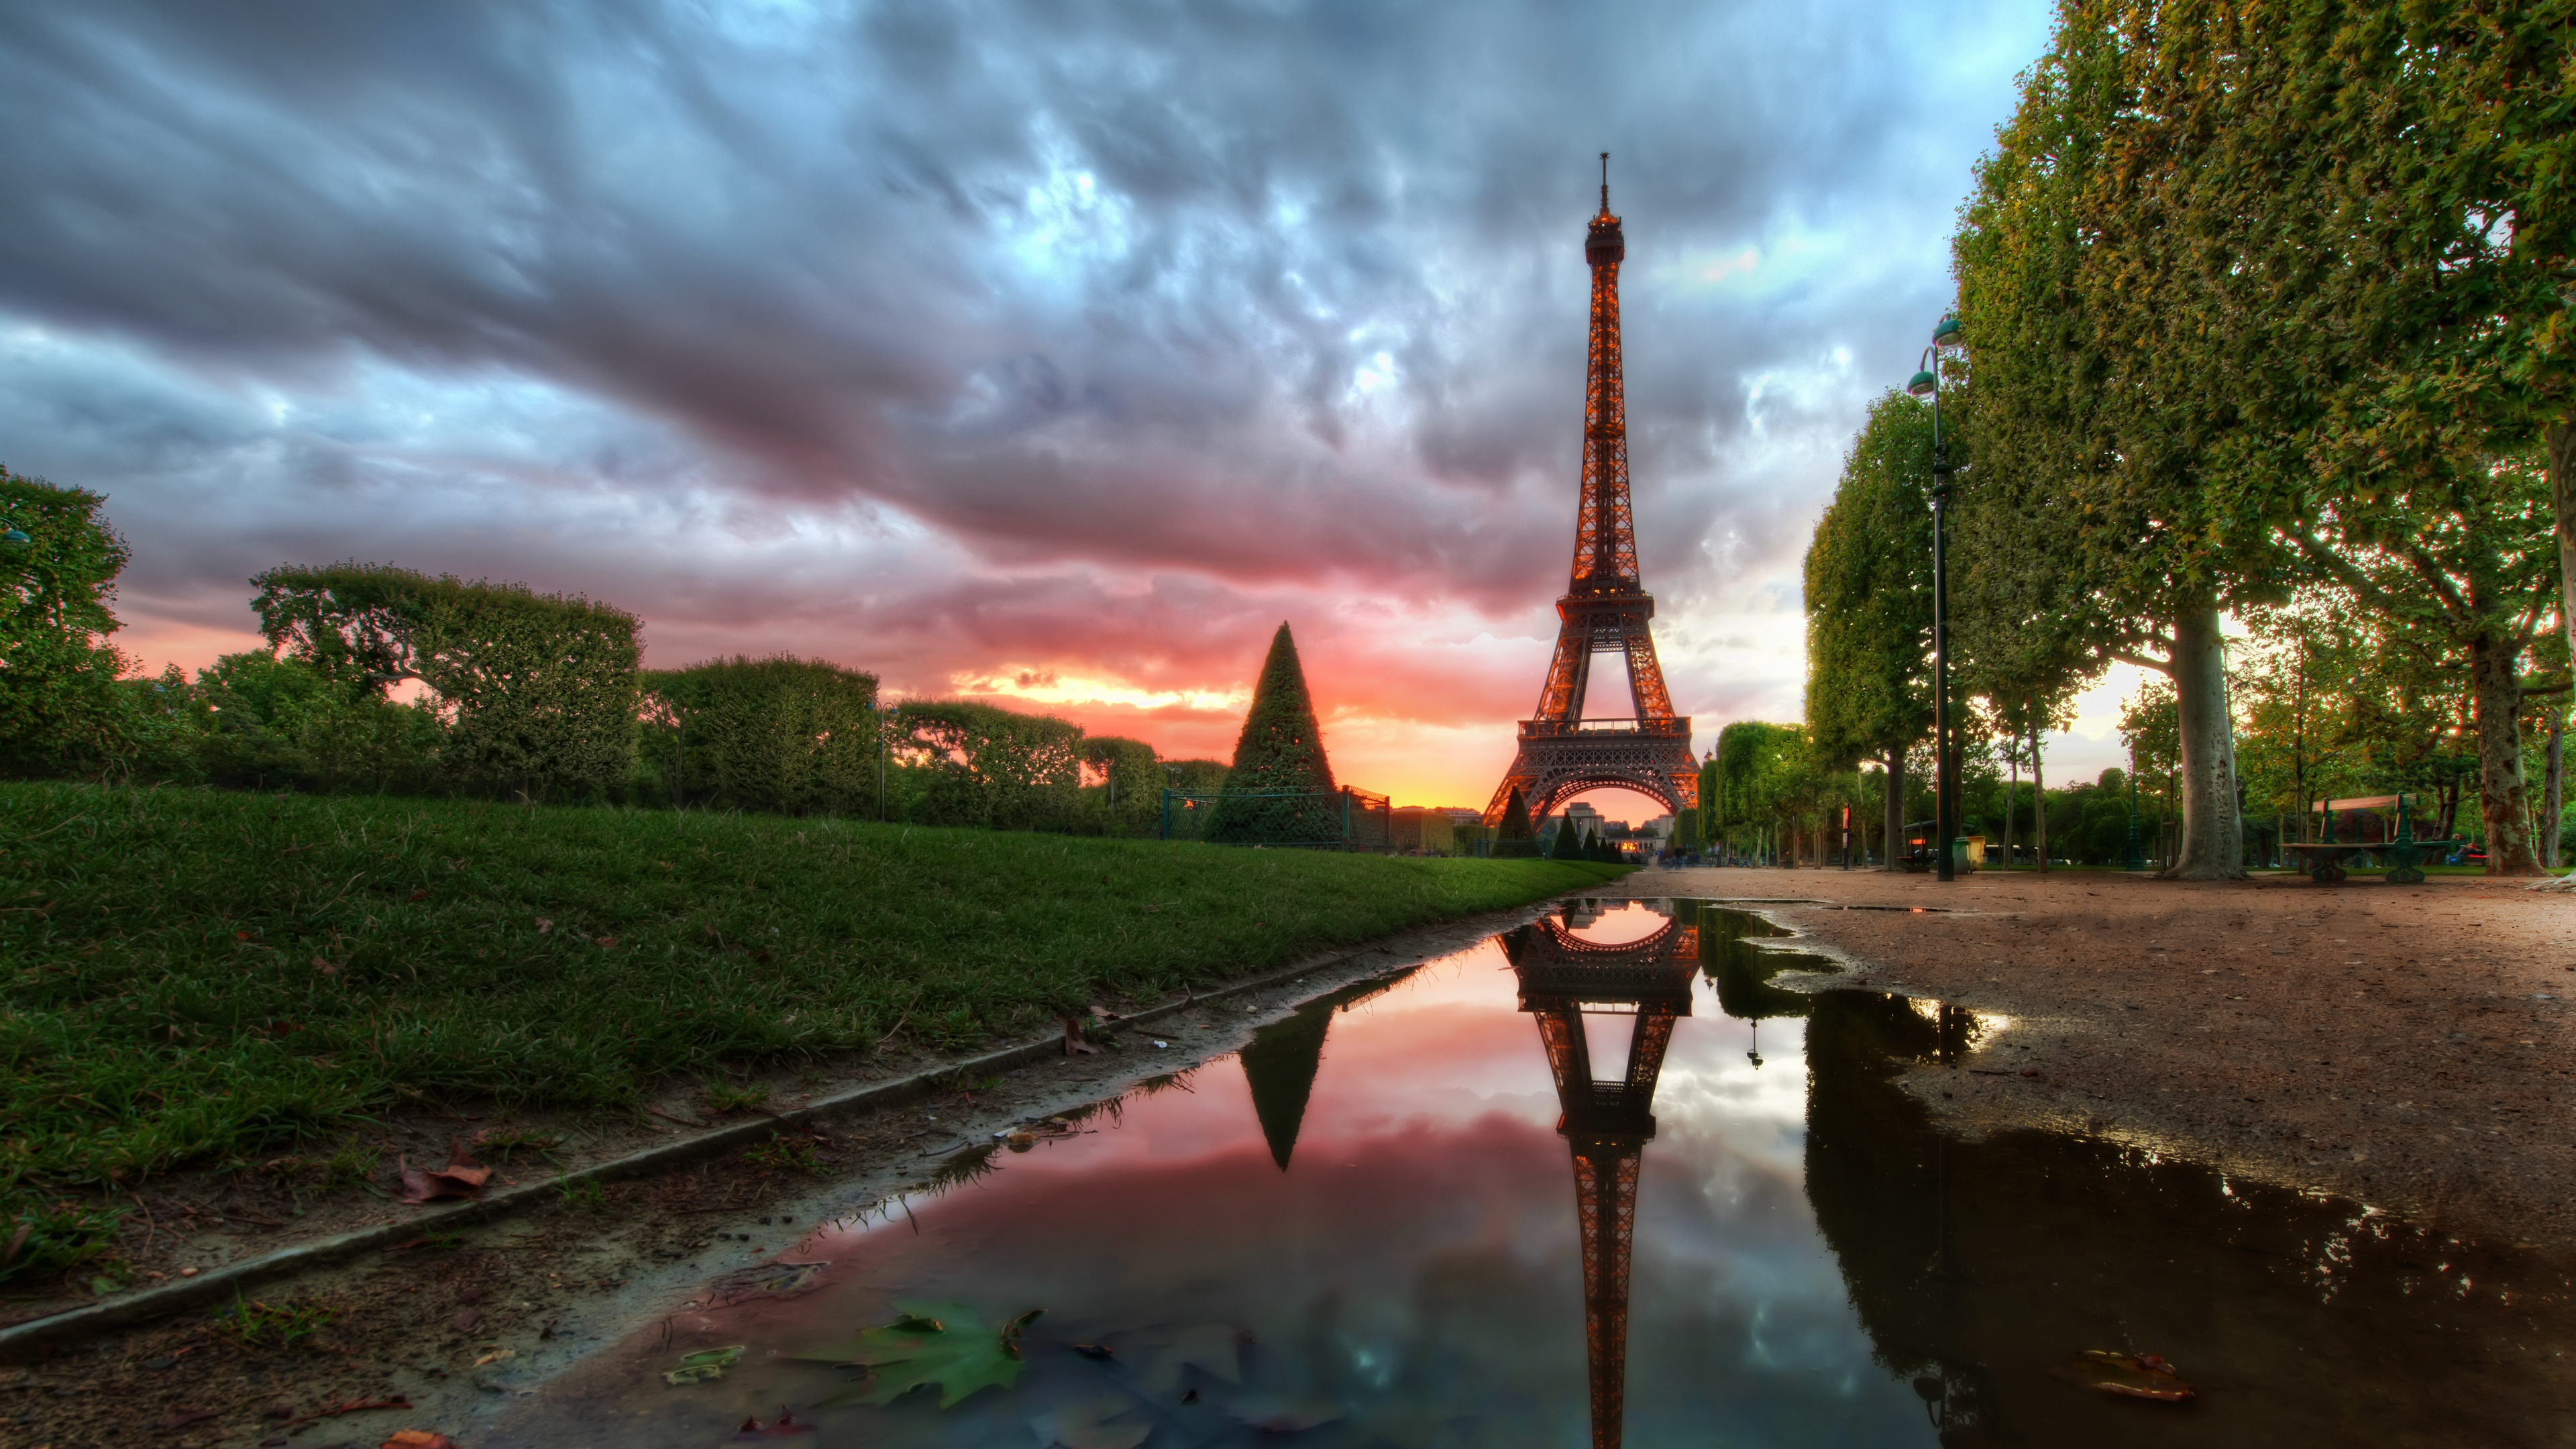 General 3840x2160 Trey Ratcliff photography cityscape France Paris Eiffel Tower building park trees sky clouds water reflection sunset glow landmark Europe